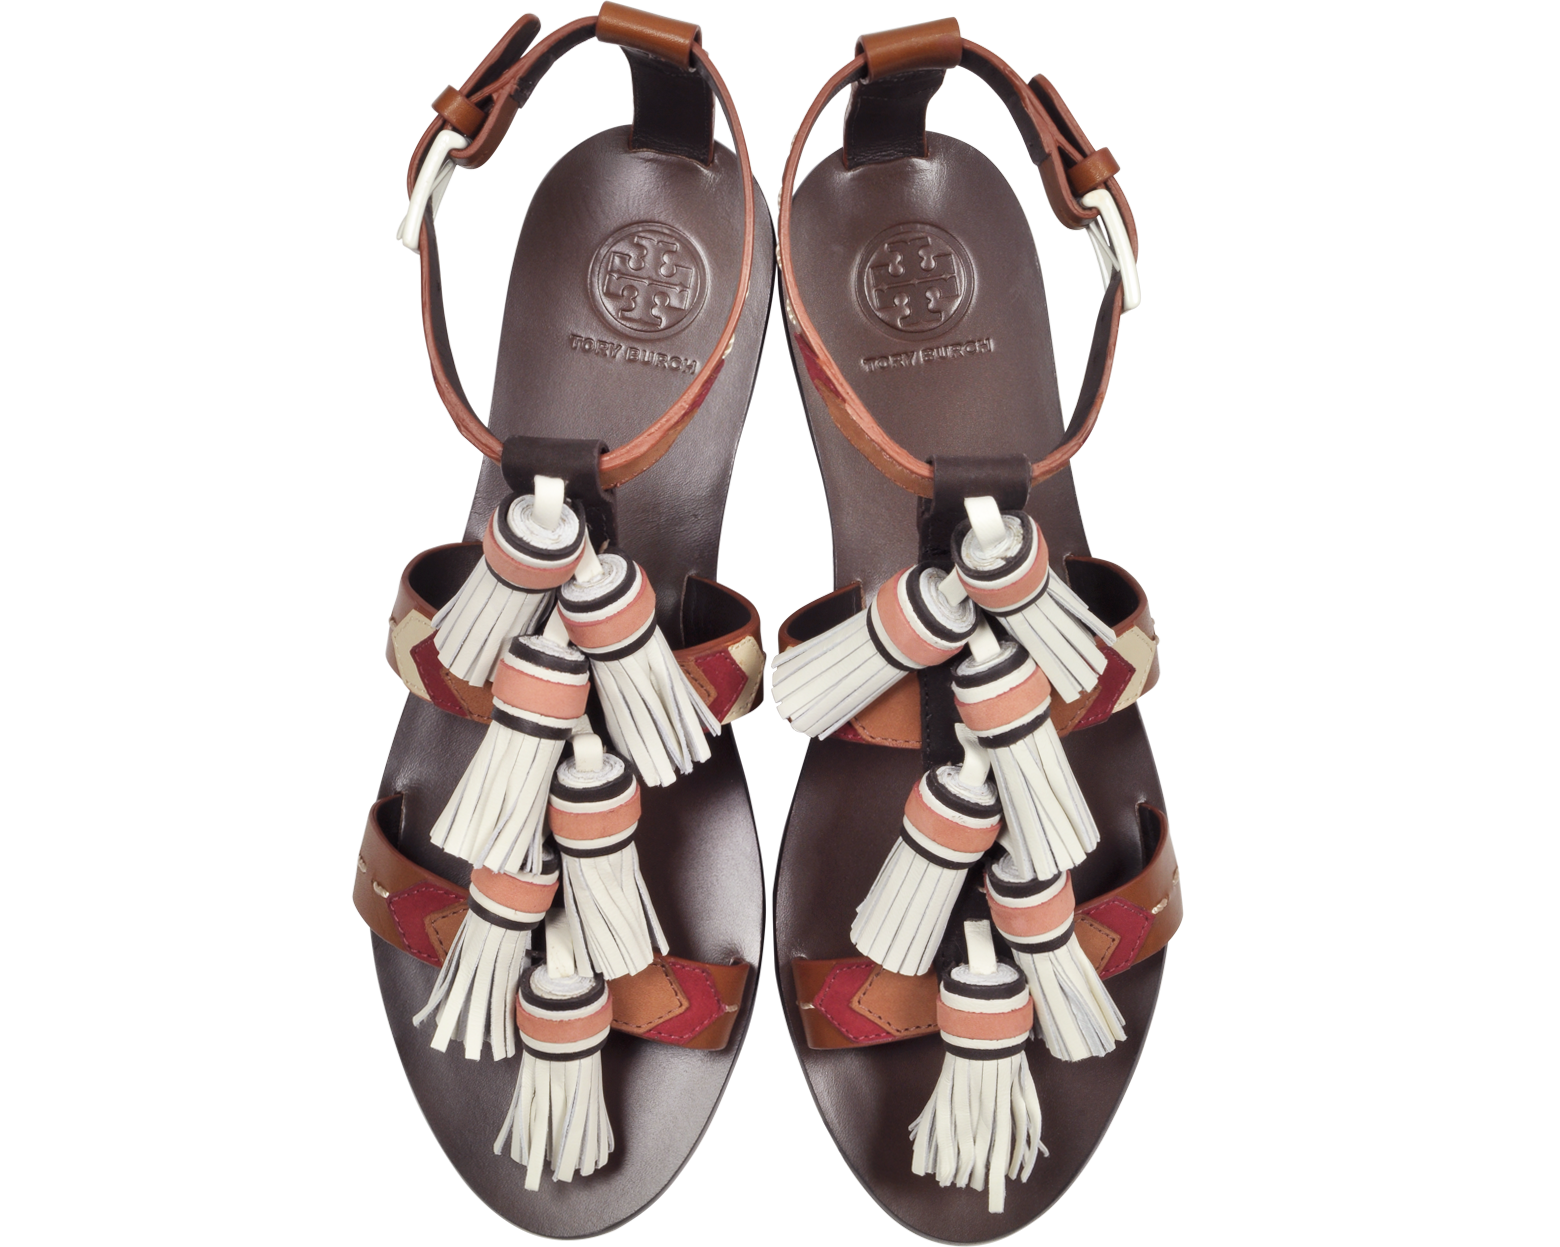 Tory Burch Weaver Multi Tan and Light Almond Leather Flat Sandals